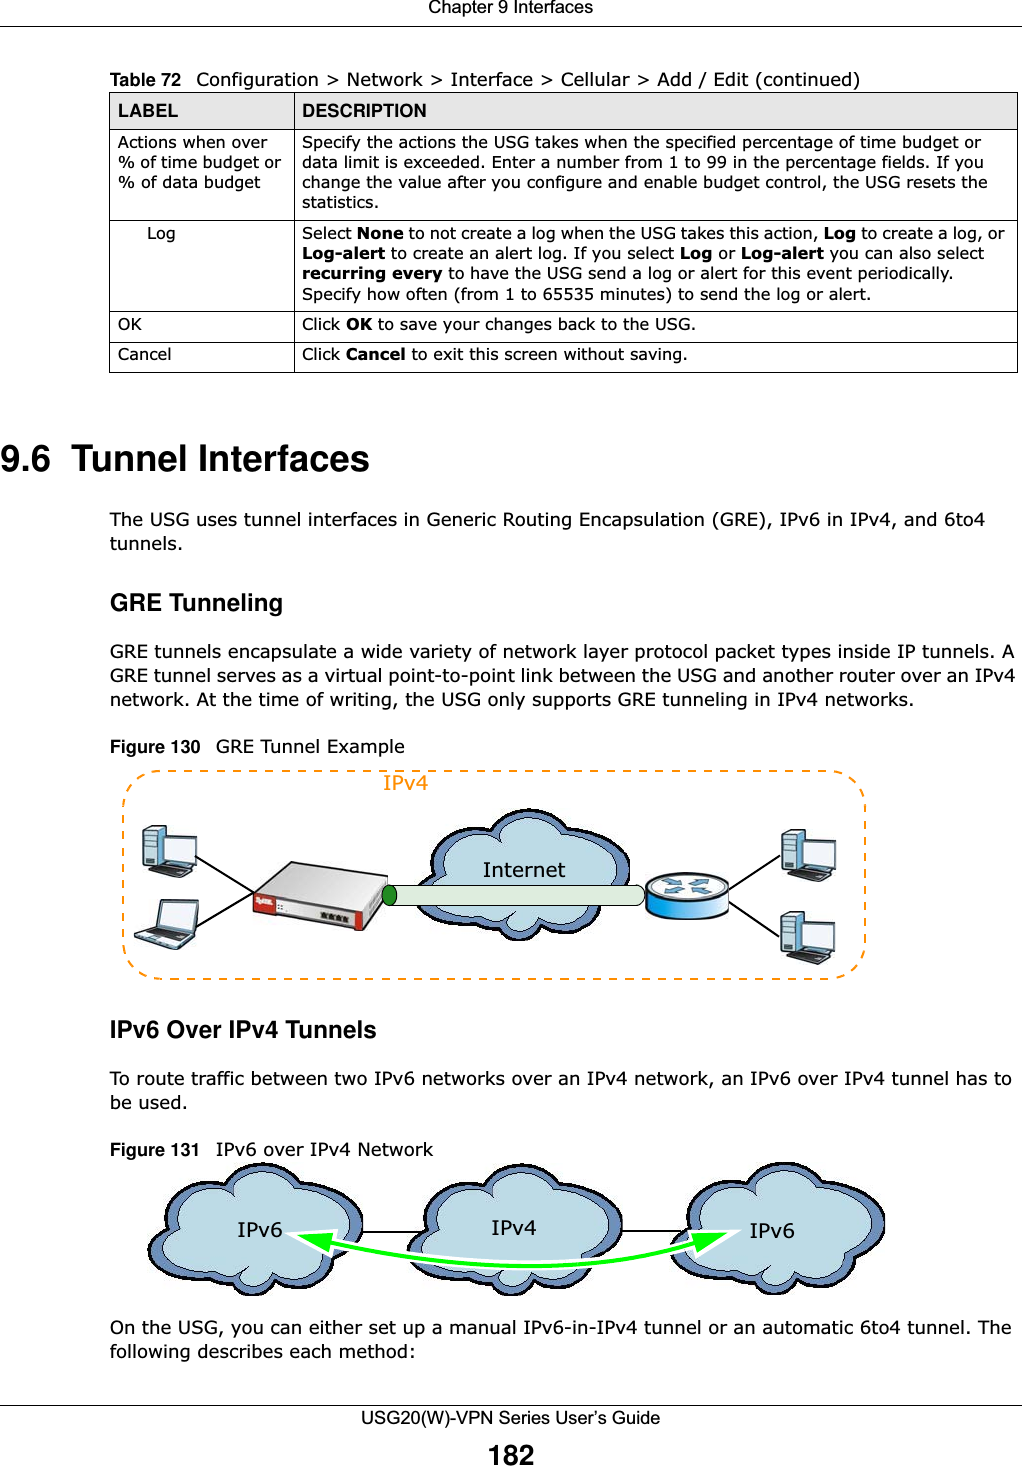 Chapter 9 InterfacesUSG20(W)-VPN Series User’s Guide1829.6  Tunnel InterfacesThe USG uses tunnel interfaces in Generic Routing Encapsulation (GRE), IPv6 in IPv4, and 6to4 tunnels.GRE TunnelingGRE tunnels encapsulate a wide variety of network layer protocol packet types inside IP tunnels. A GRE tunnel serves as a virtual point-to-point link between the USG and another router over an IPv4 network. At the time of writing, the USG only supports GRE tunneling in IPv4 networks.Figure 130   GRE Tunnel ExampleIPv6 Over IPv4 TunnelsTo route traffic between two IPv6 networks over an IPv4 network, an IPv6 over IPv4 tunnel has to be used.Figure 131   IPv6 over IPv4 Network On the USG, you can either set up a manual IPv6-in-IPv4 tunnel or an automatic 6to4 tunnel. The following describes each method:Actions when over % of time budget or % of data budget Specify the actions the USG takes when the specified percentage of time budget or data limit is exceeded. Enter a number from 1 to 99 in the percentage fields. If you change the value after you configure and enable budget control, the USG resets the statistics.Log Select None to not create a log when the USG takes this action, Log to create a log, or Log-alert to create an alert log. If you select Log or Log-alert you can also select recurring every to have the USG send a log or alert for this event periodically. Specify how often (from 1 to 65535 minutes) to send the log or alert.OK Click OK to save your changes back to the USG.Cancel Click Cancel to exit this screen without saving.Table 72   Configuration &gt; Network &gt; Interface &gt; Cellular &gt; Add / Edit (continued)LABEL DESCRIPTIONInternetIPv4 IPv4IPv6 IPv6